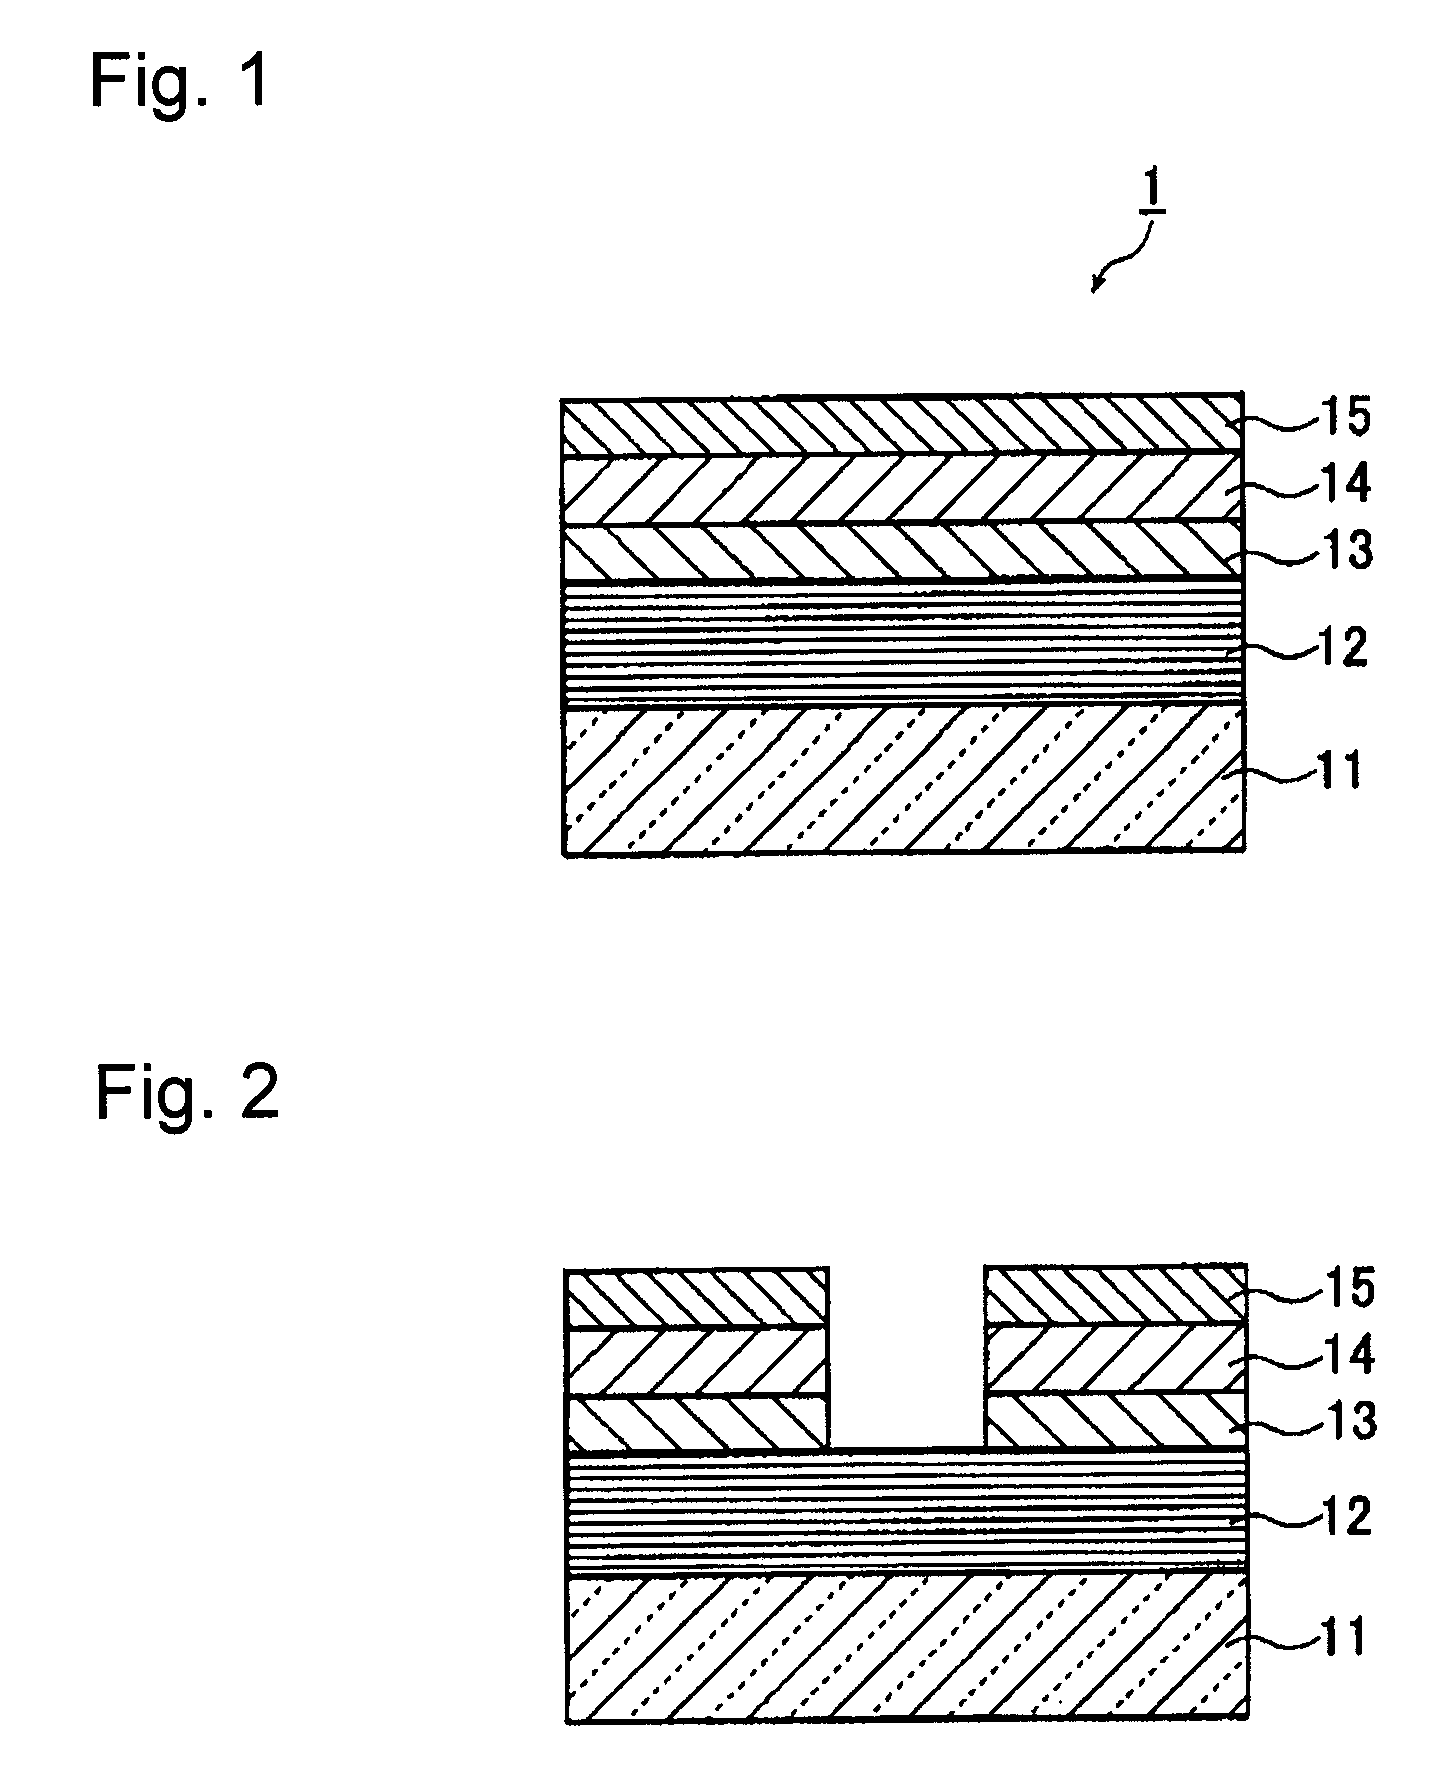 Reflective mask blank for EUV lithography